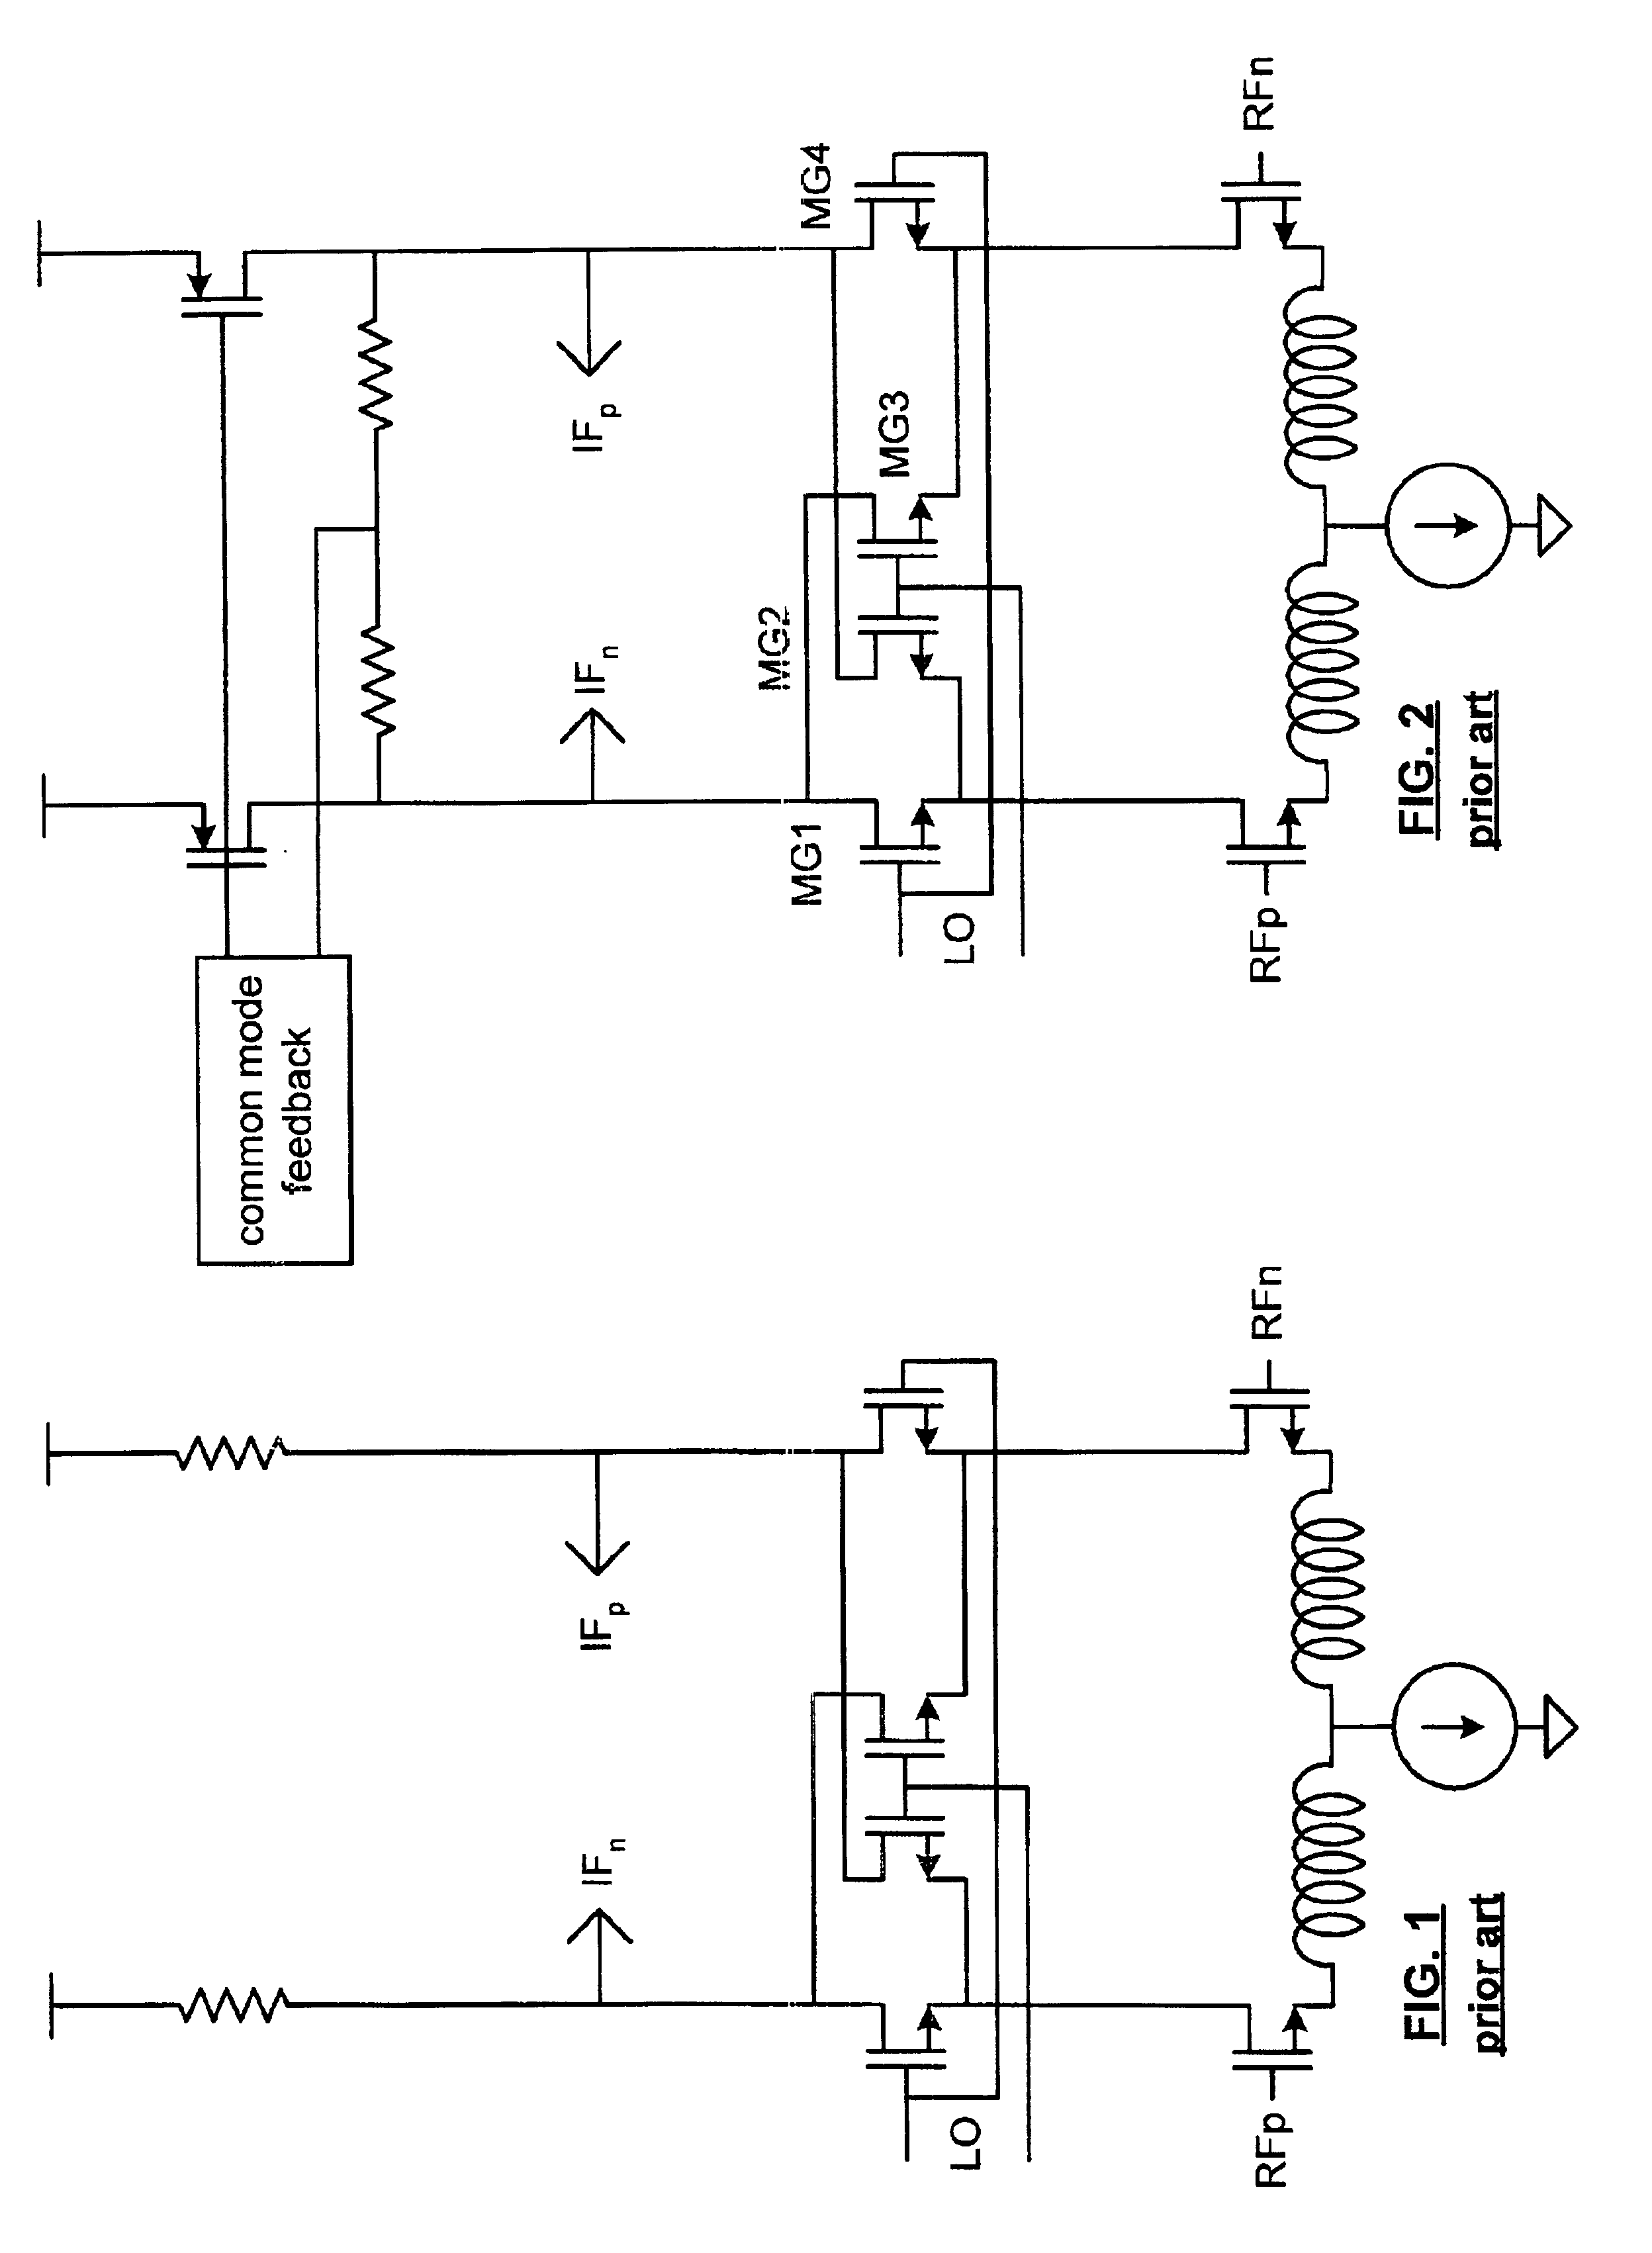 Mixer having low noise, controllable gain, and/or low supply voltage operation